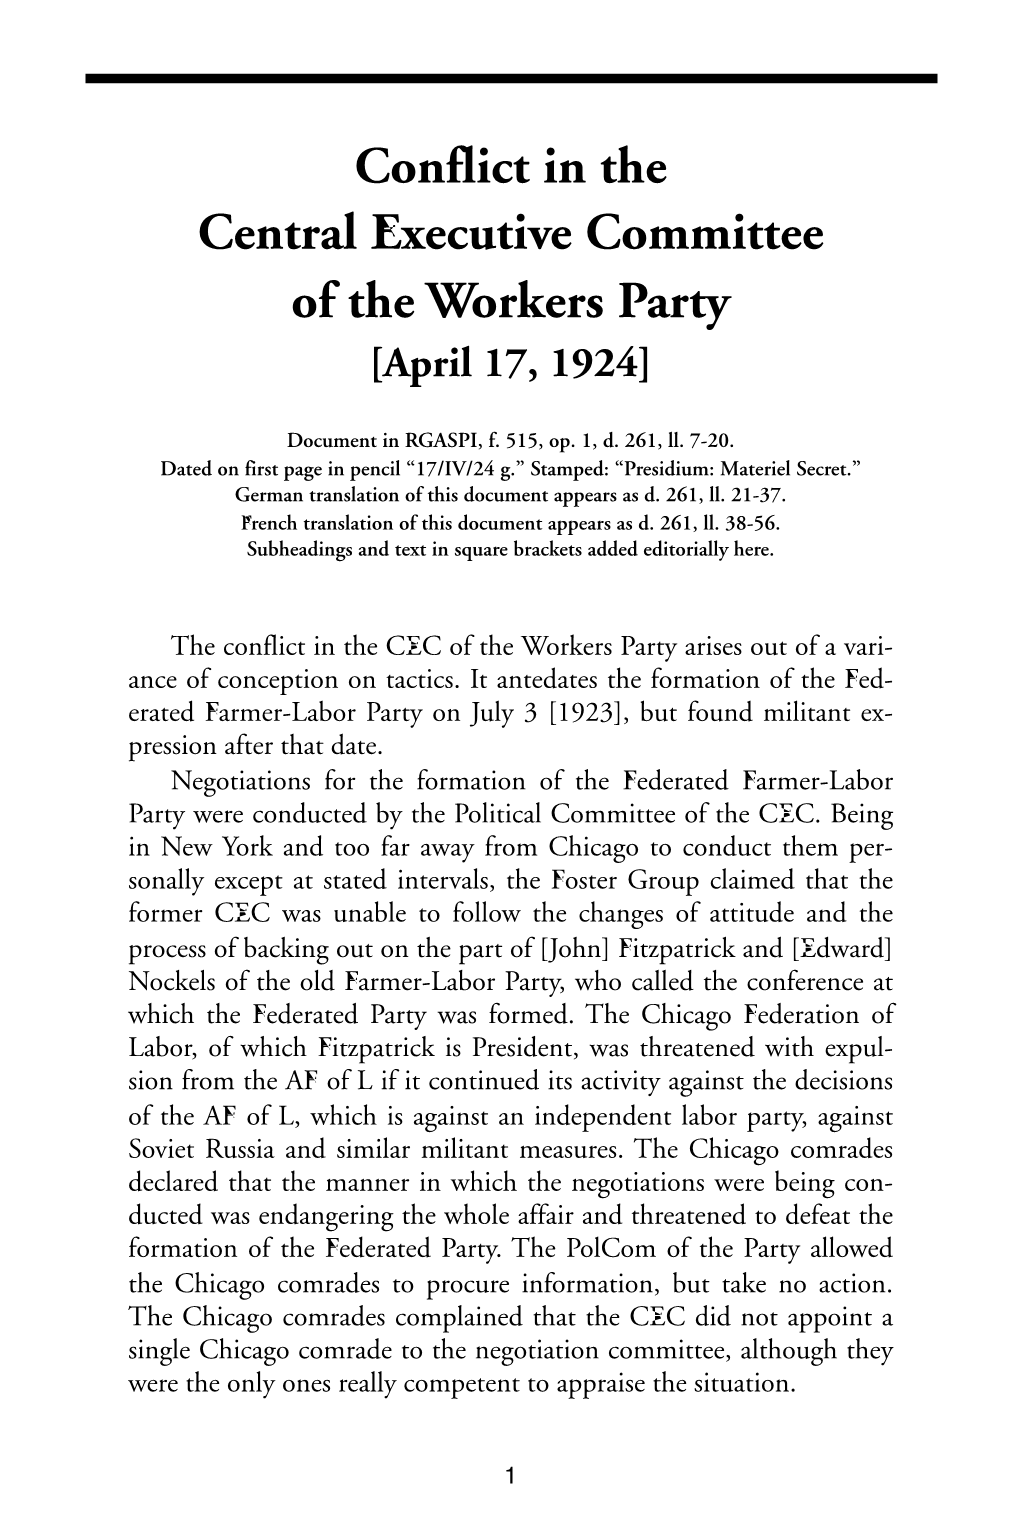 Conflict in the Central Executive Committee of the Workers Party [April 17, 1924]